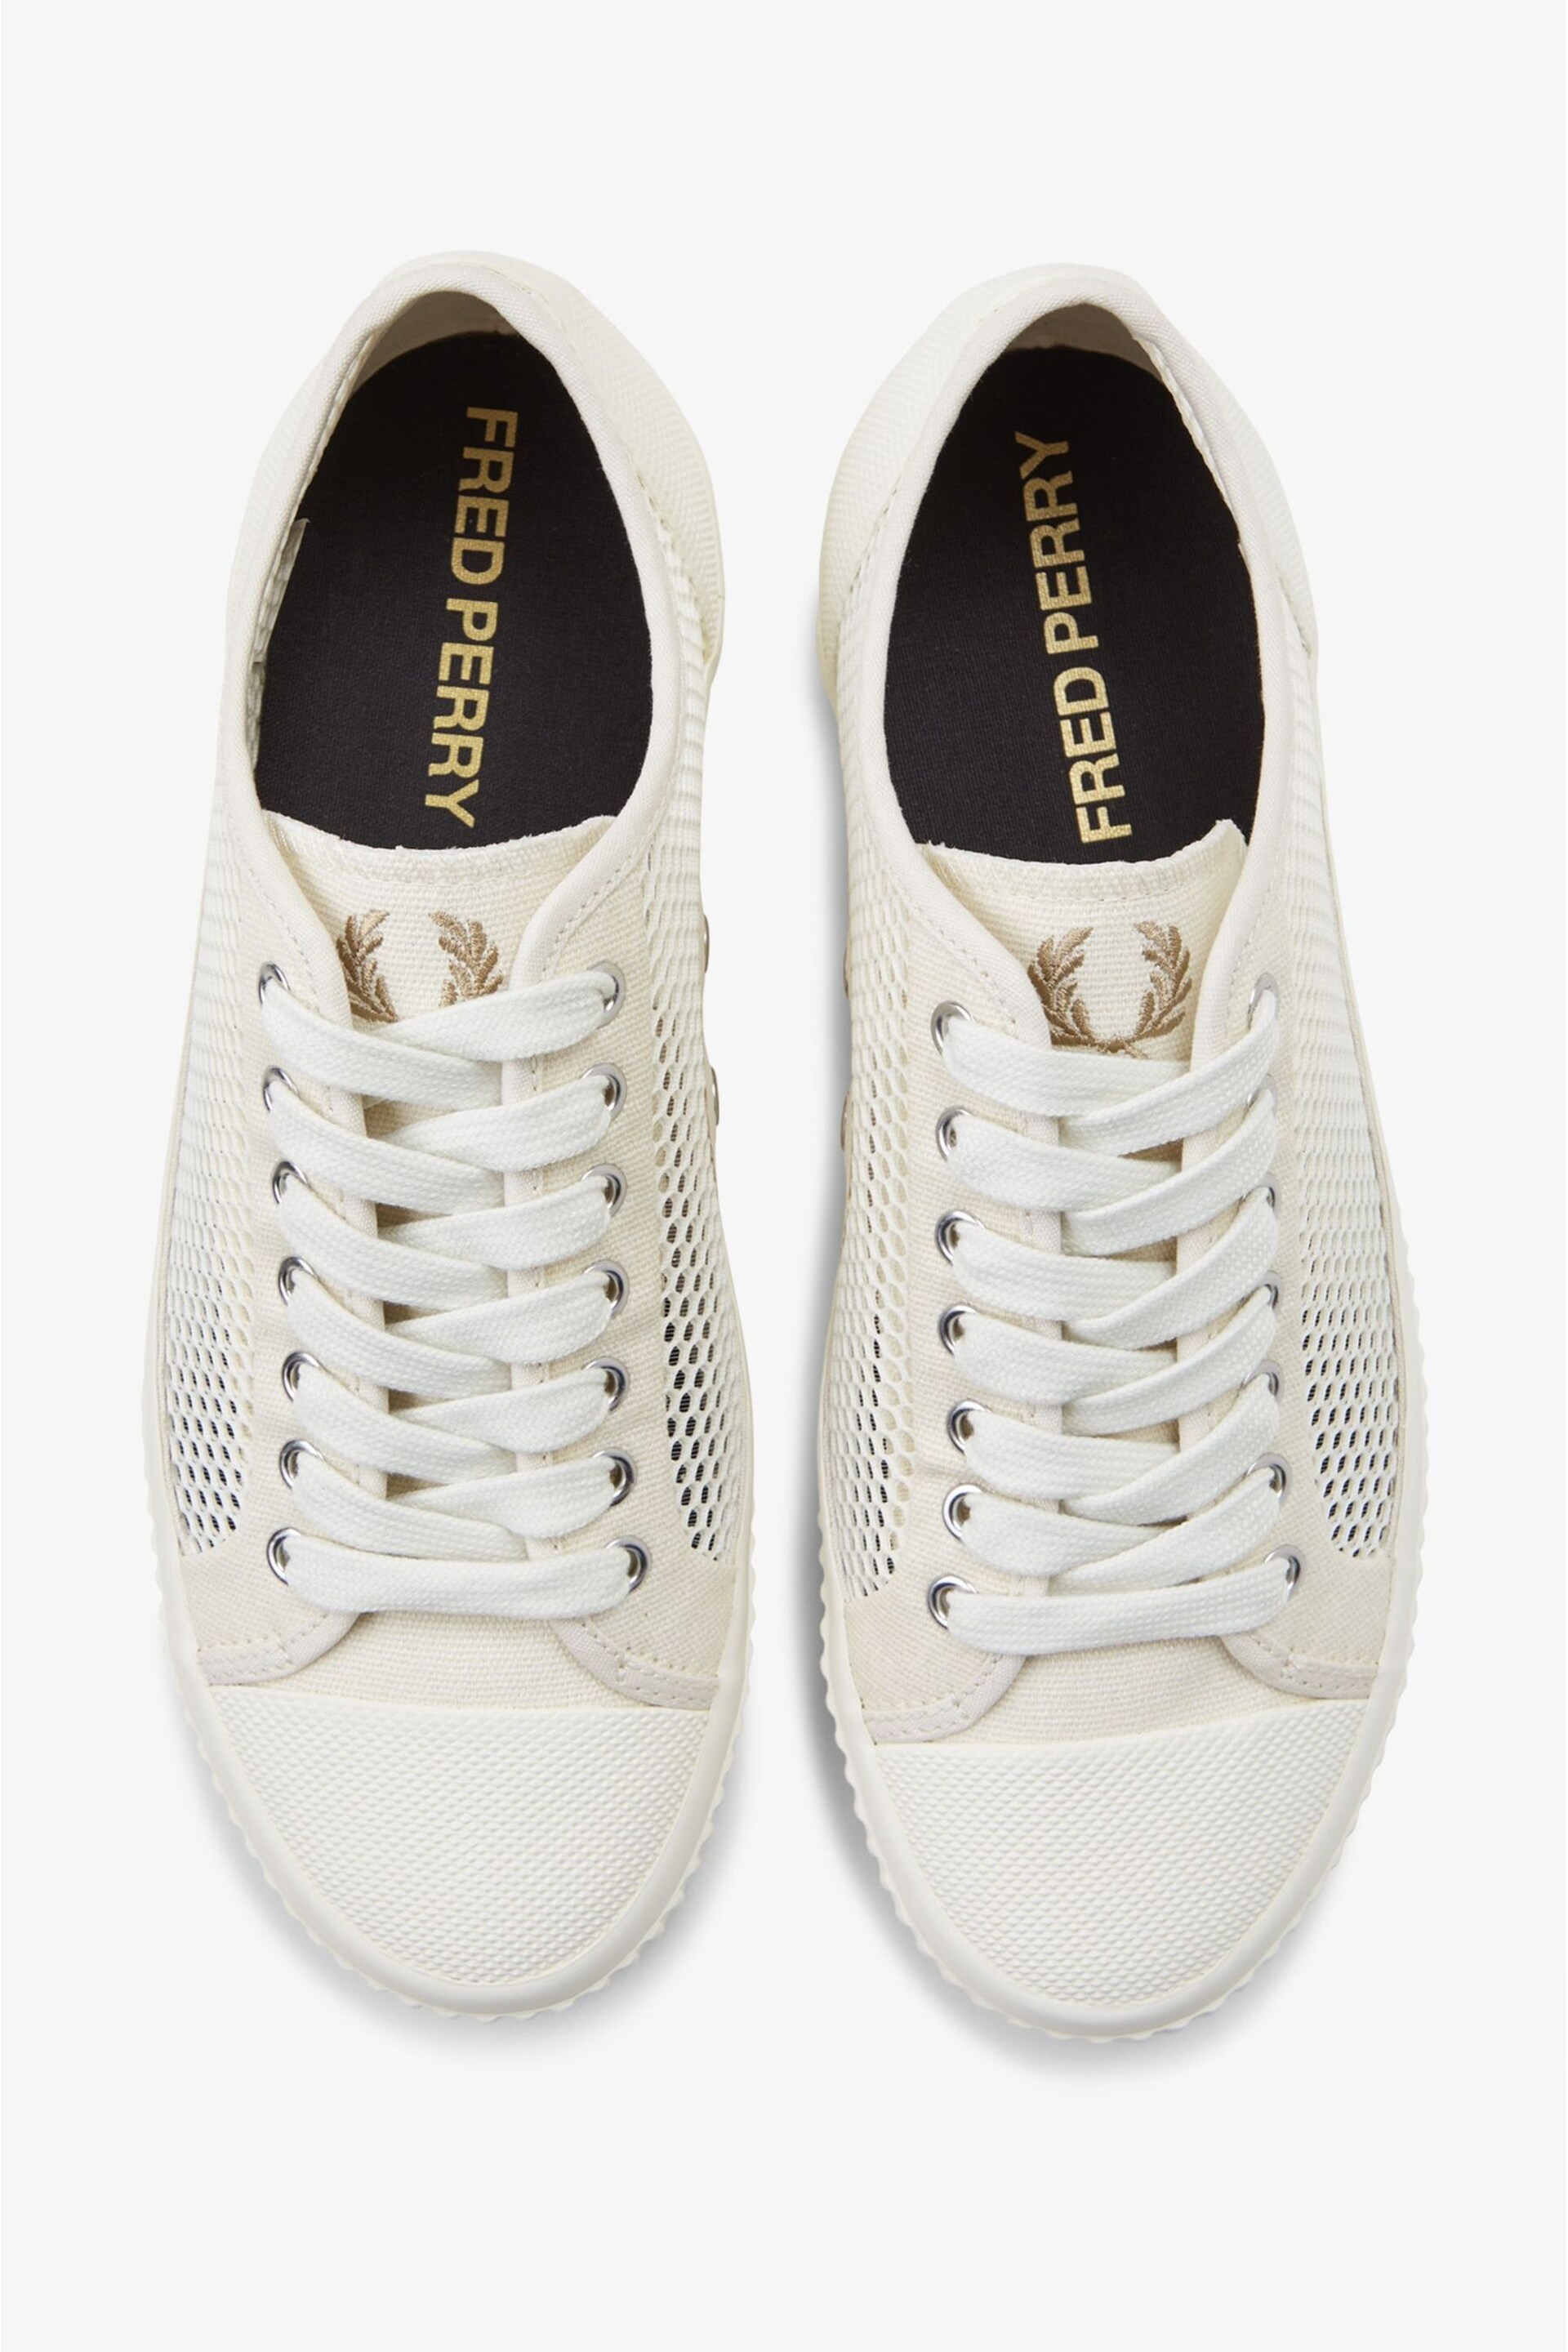 Fred Perry Womens Ecru White Hughes Mesh Trainers - Image 4 of 5